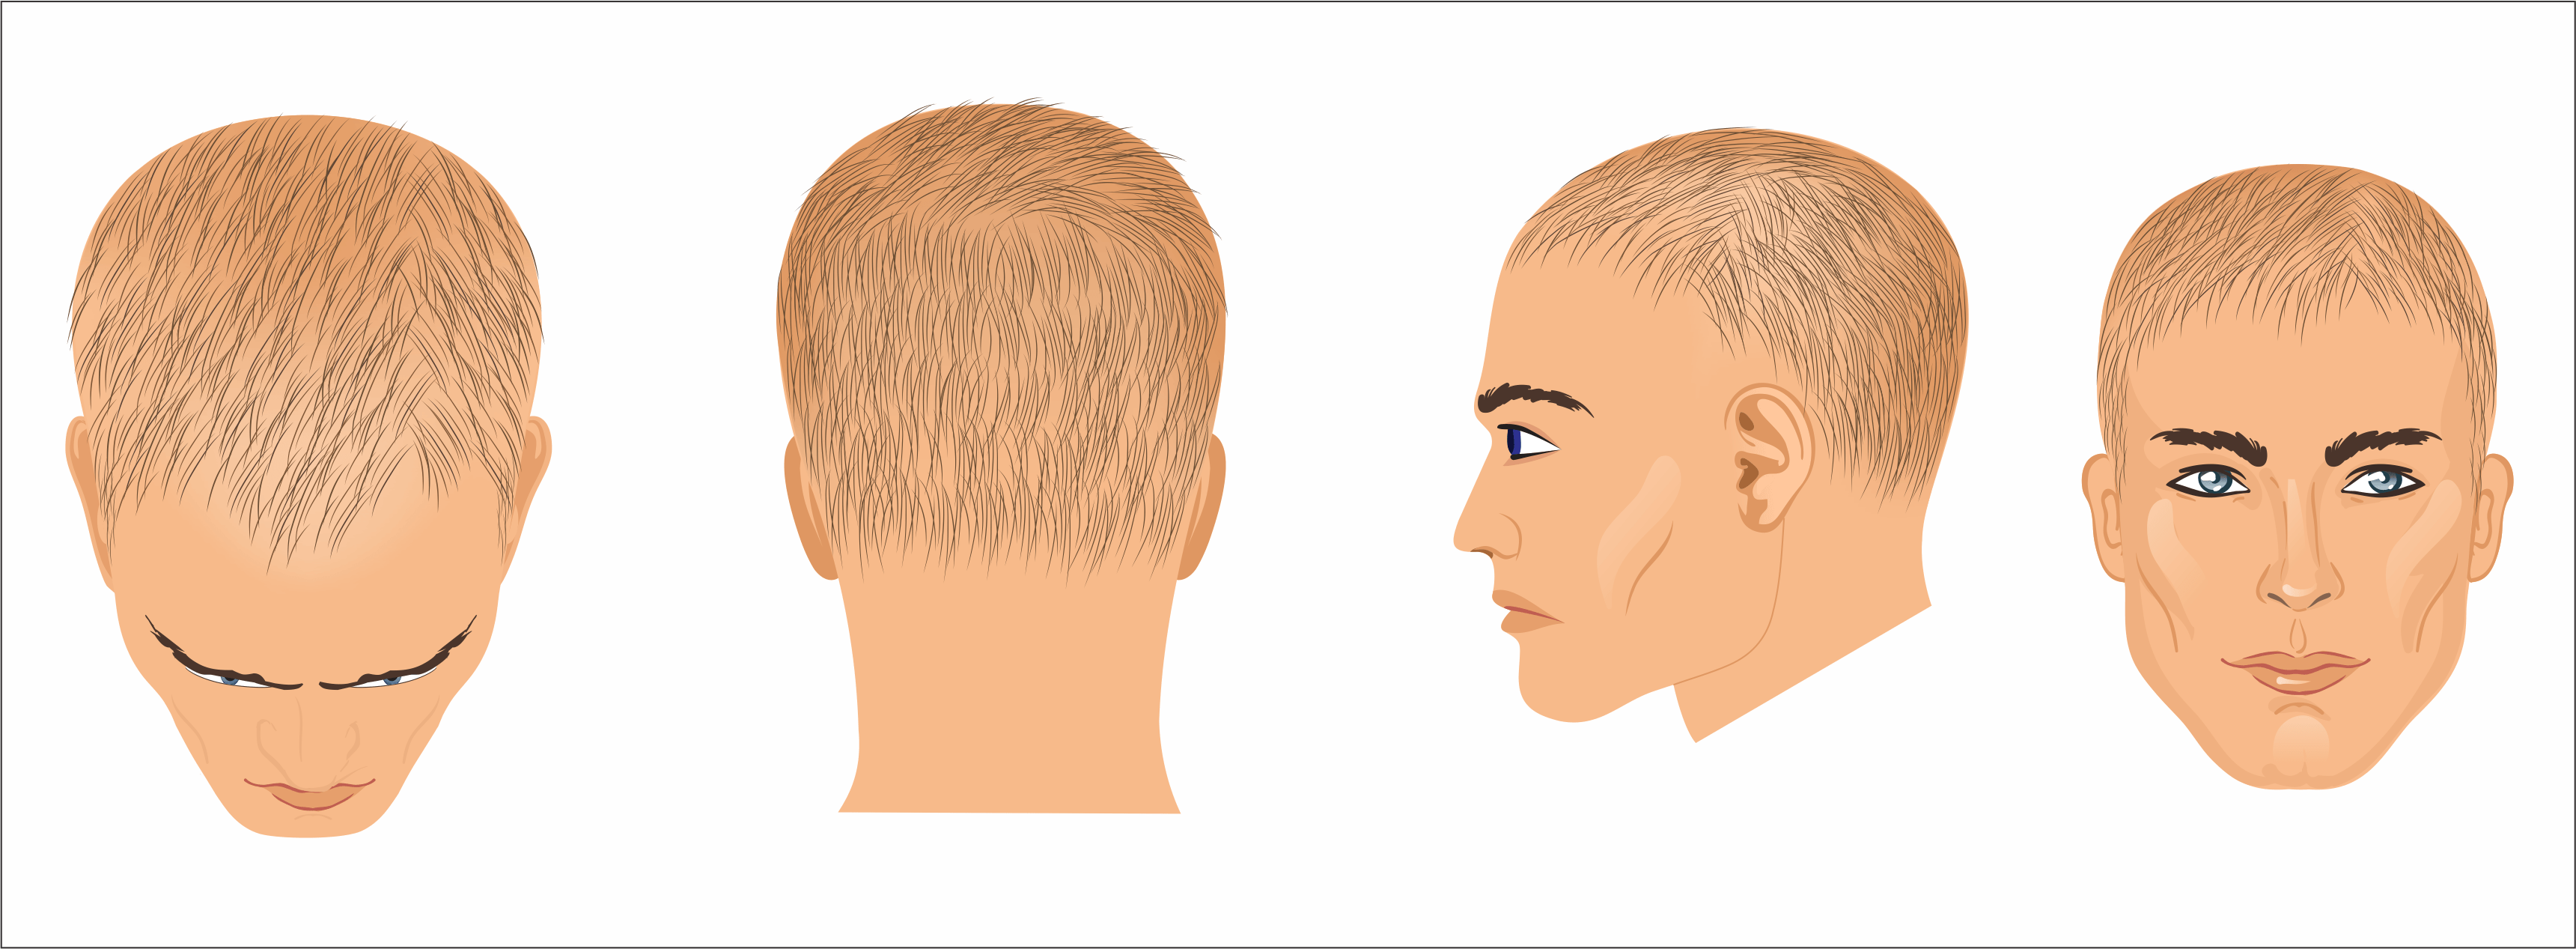 Recovering from hair loss caused by telogen effluvium 